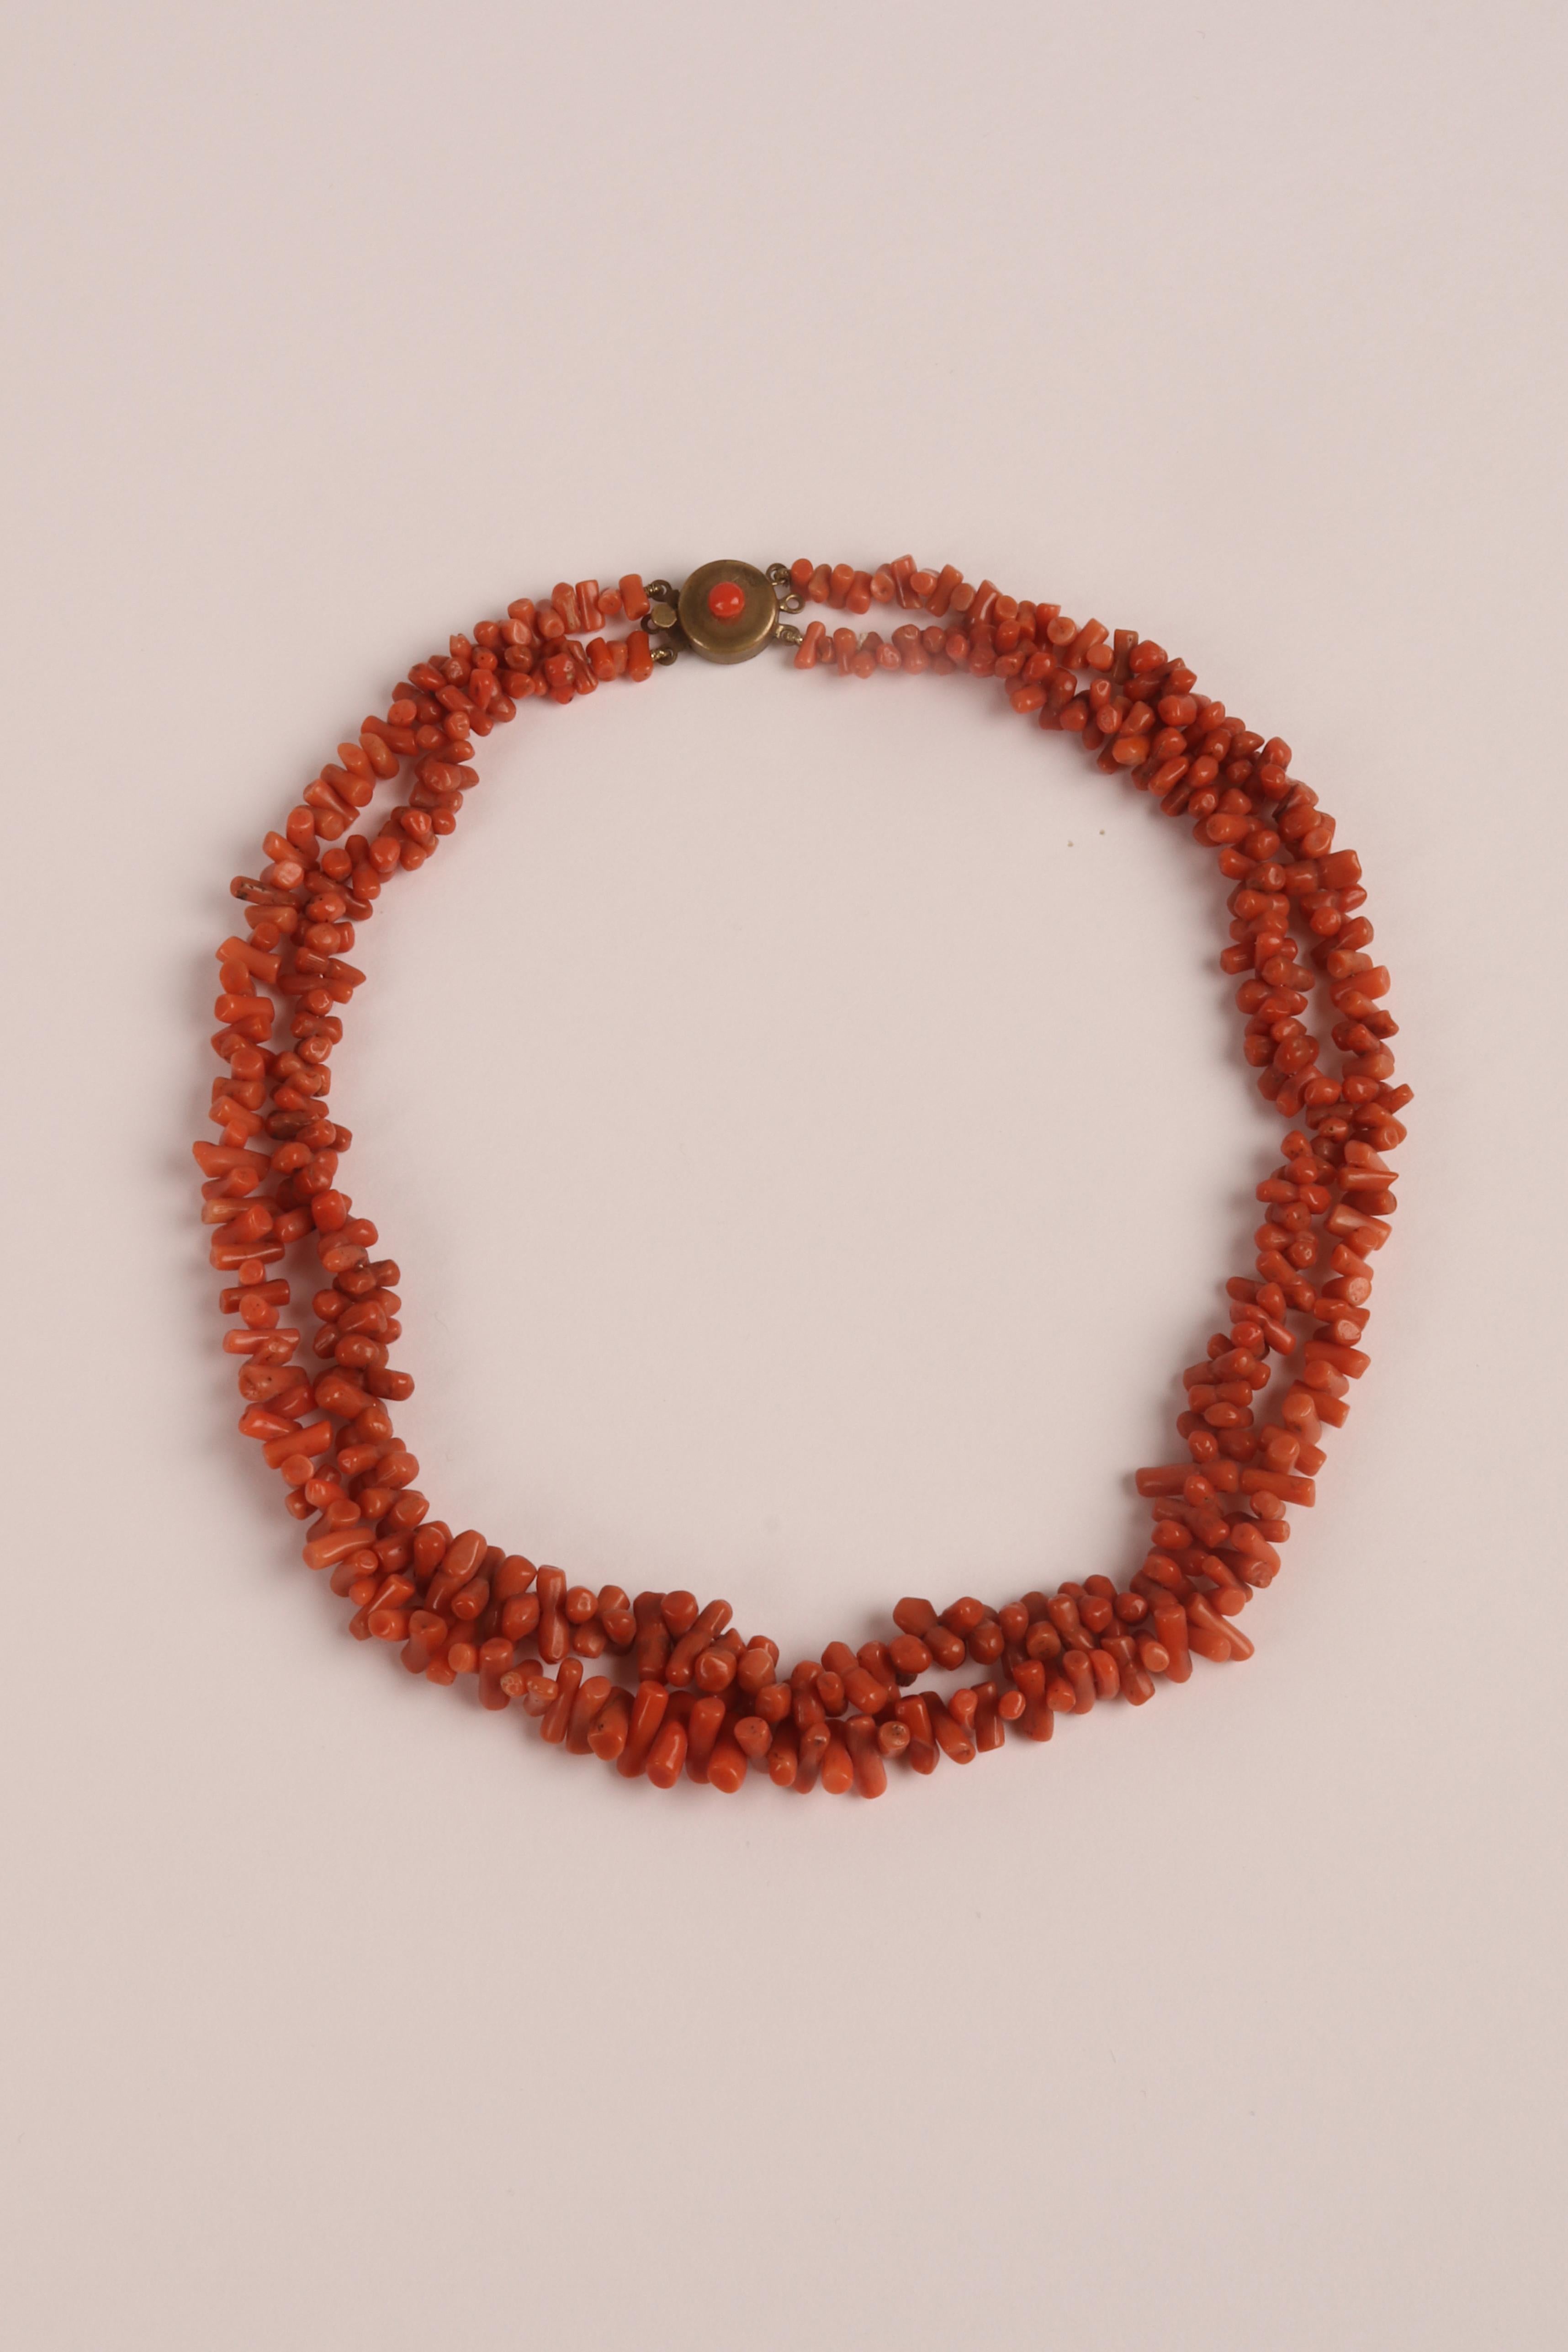 Metal Sciacca coral necklace, England end of 19th century. For Sale